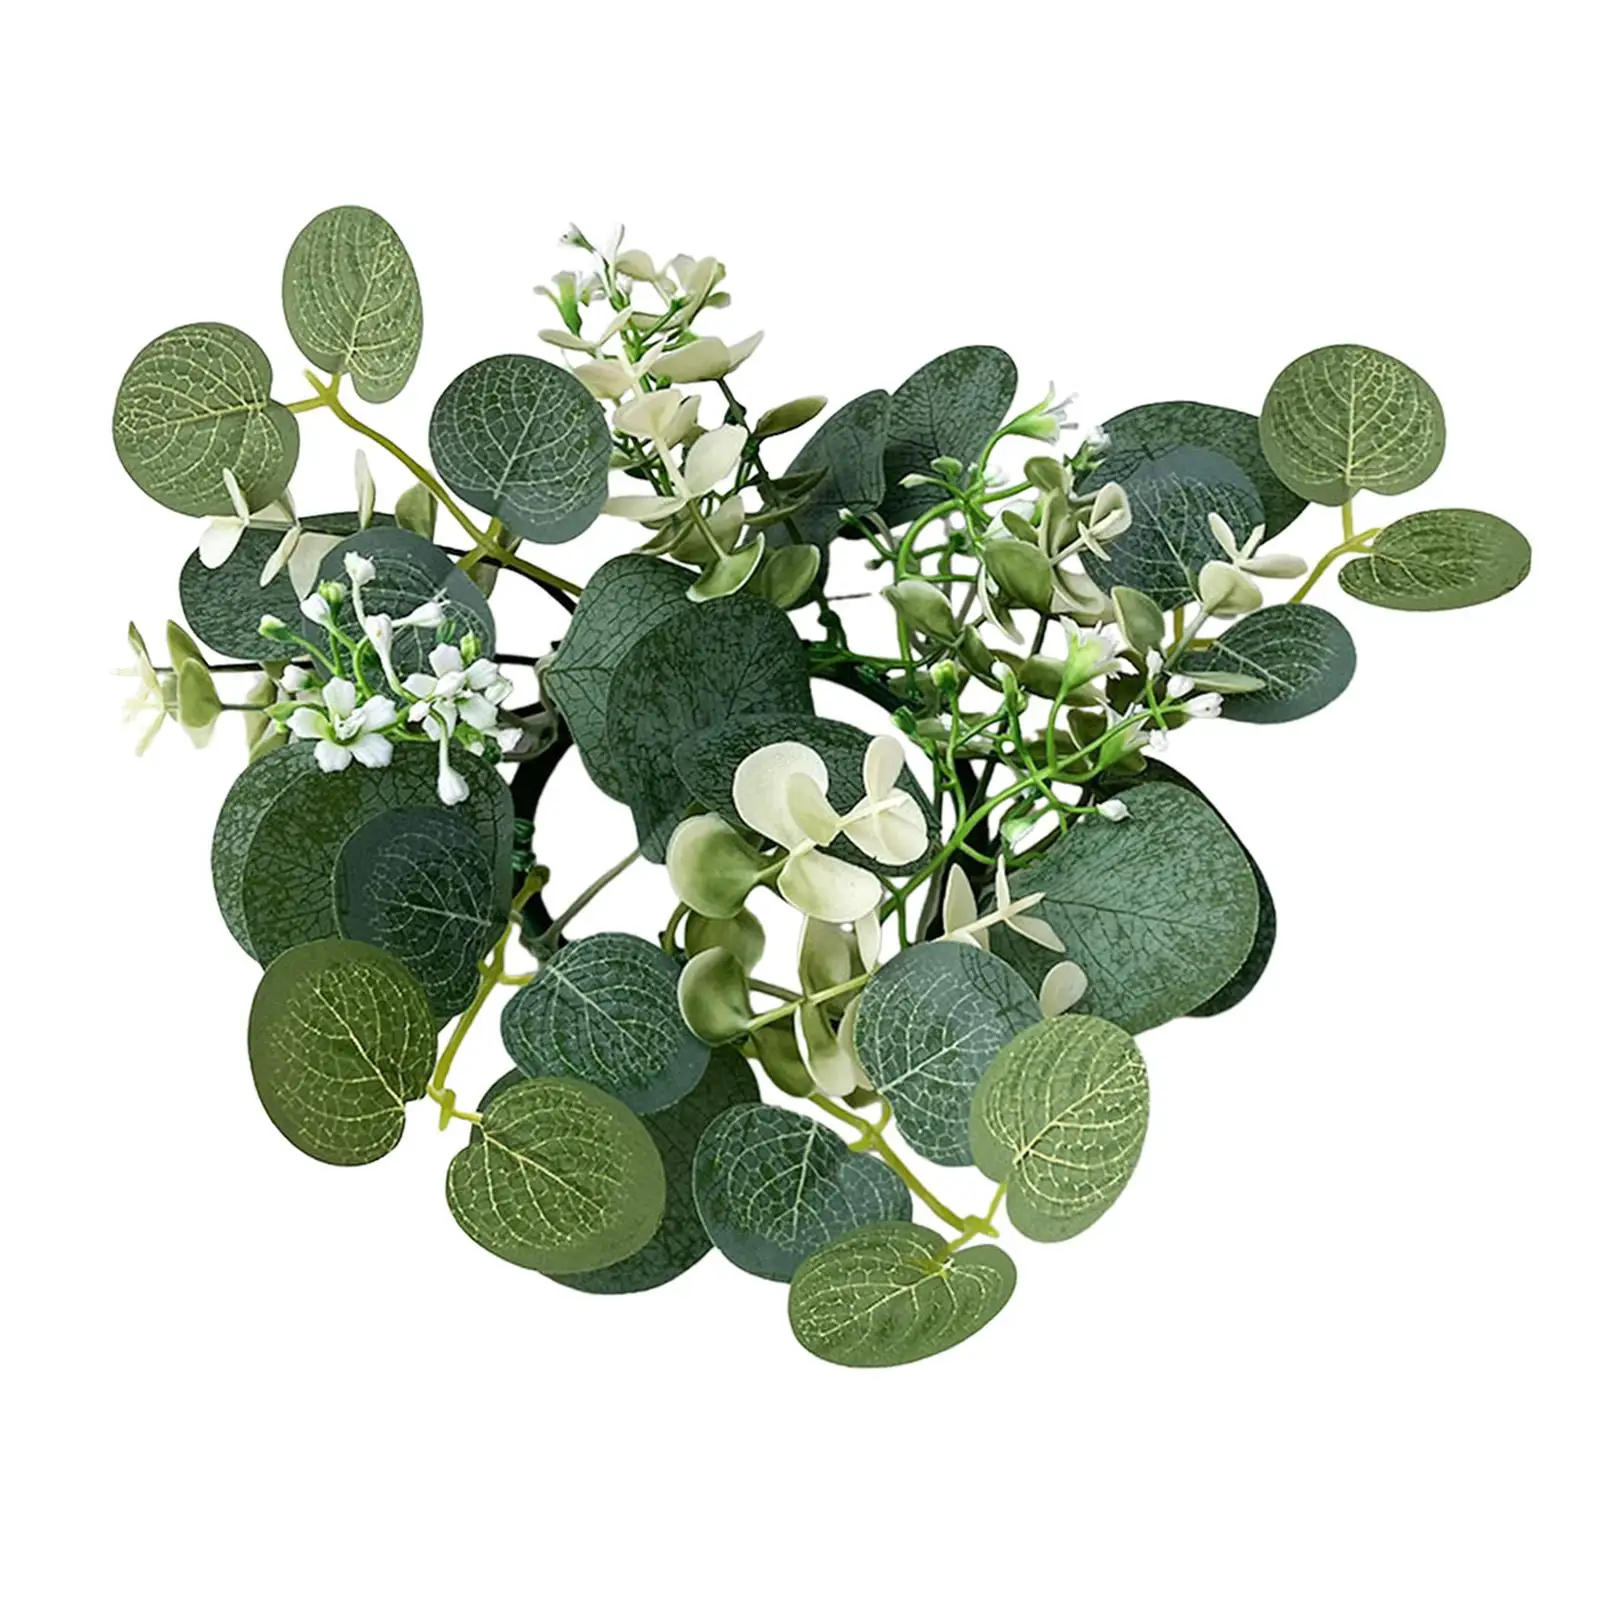 Candle Ring Decoration Greenery Garland Artificial Eucalyptus Leaves Wreath for Dining Room Wedding Festival Kitchen Tabletop